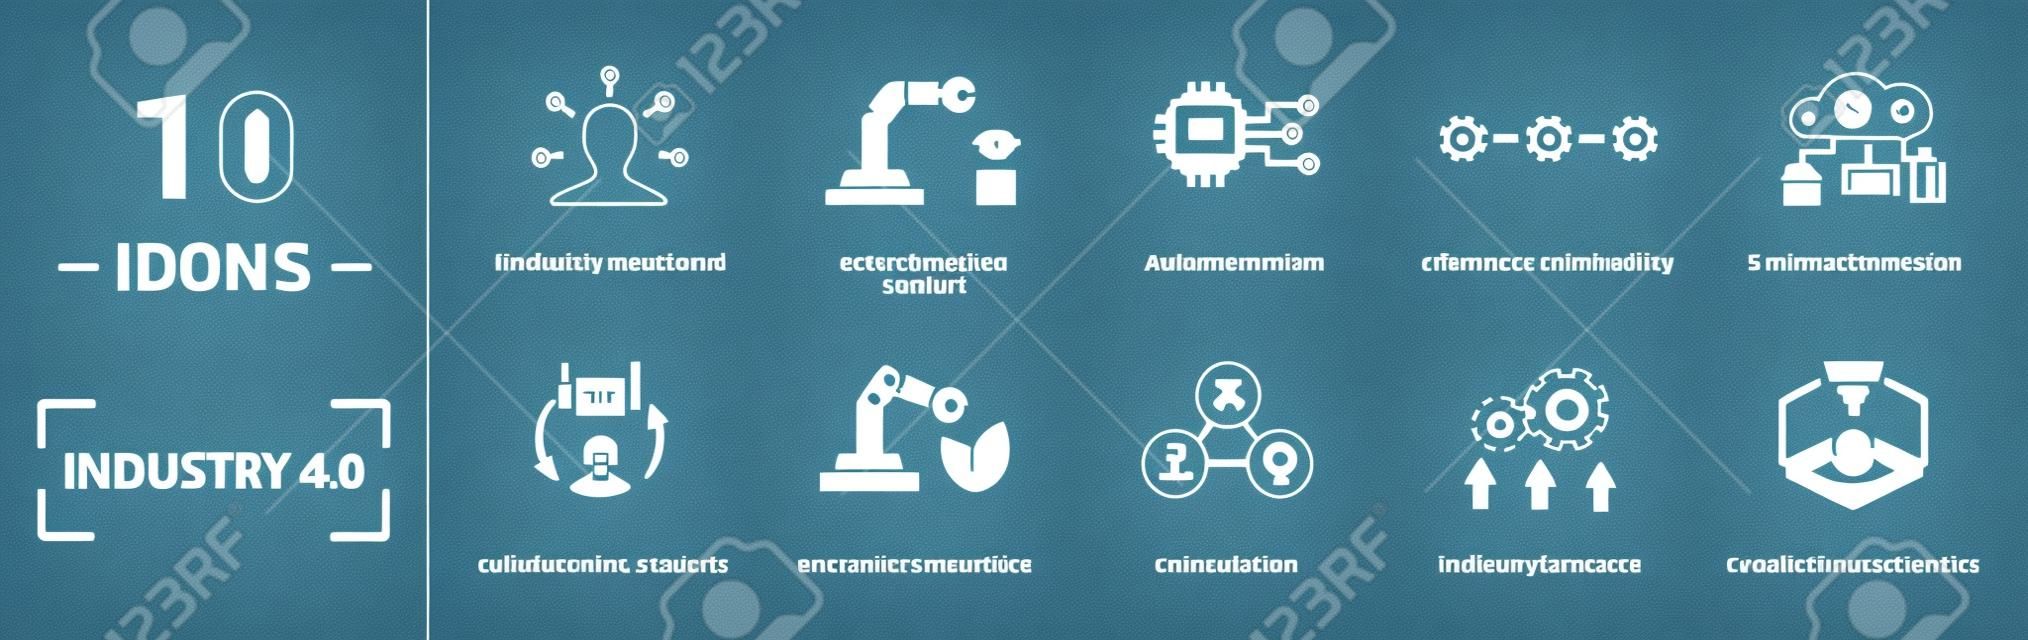 Industry 4.0 icons set collection. Includes simple elements such as Business Intelligence, Cyber Systems, Embedded System, Horizontal Integration, Internet Of Things, Industrial Ecosystems